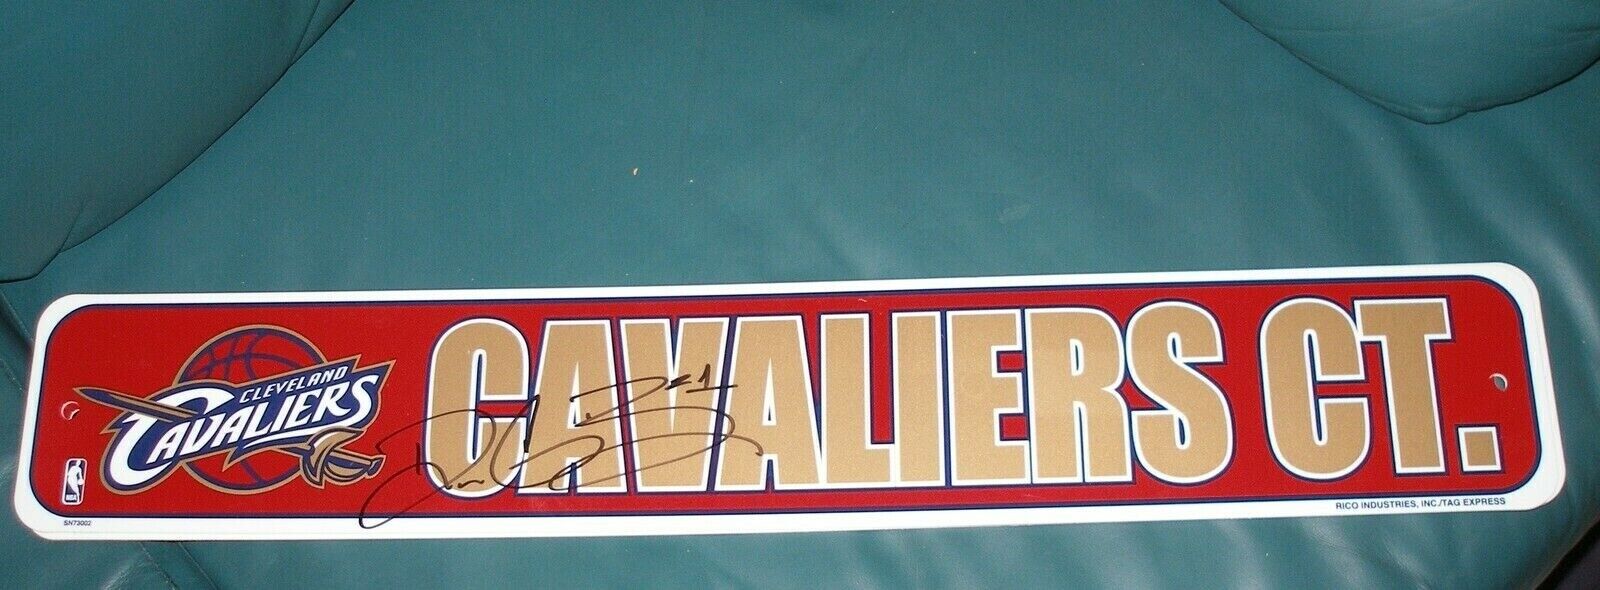 DANIEL GIBSON AUTOGRAPH CAVLIERS COURT STREET SIGN NEW CLEVELAND CAVALIERS TEXAS